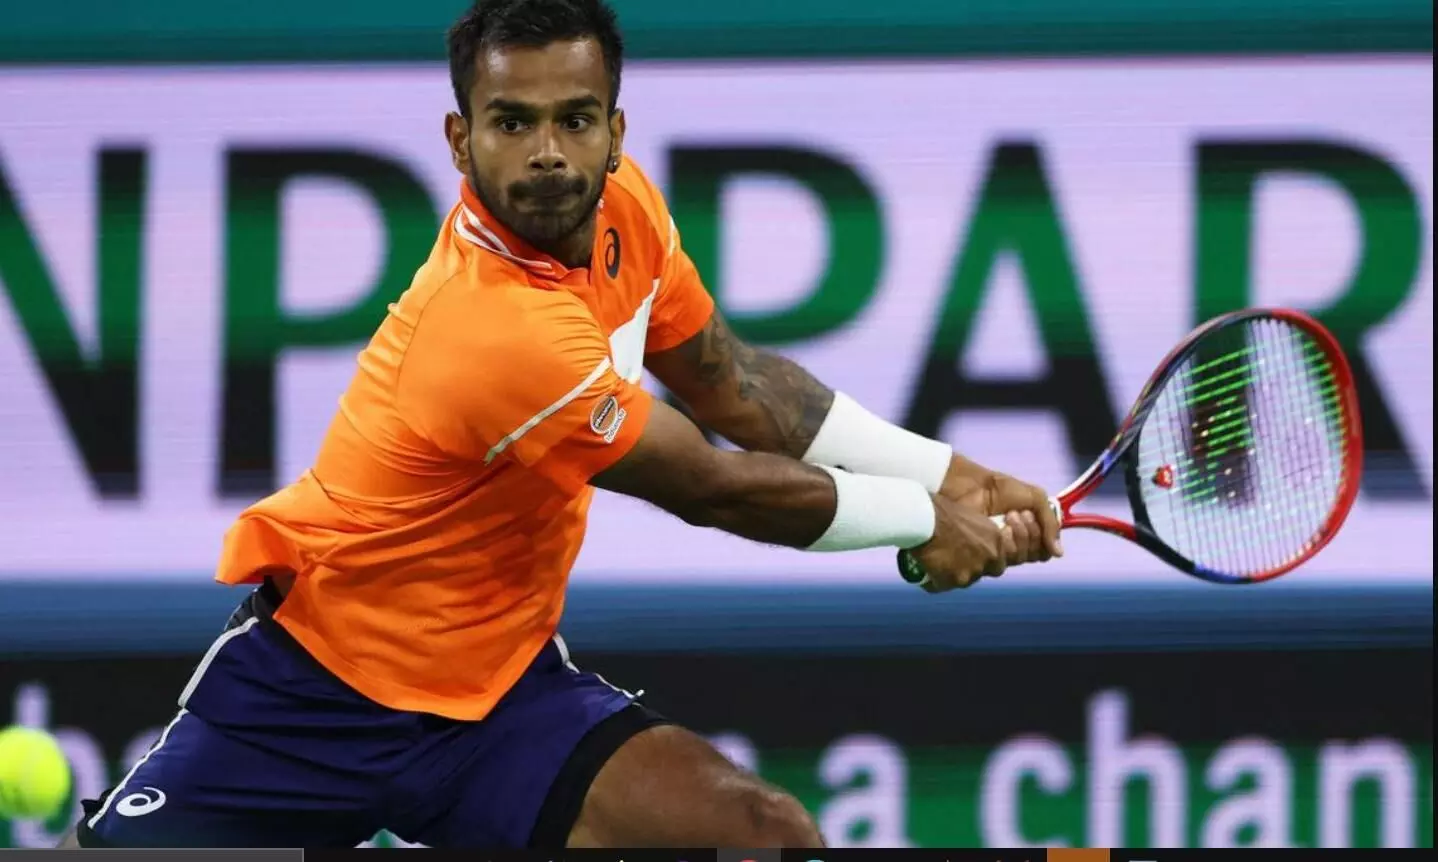 Sumit Nagal qualifies for the final round at Miami Open Debut